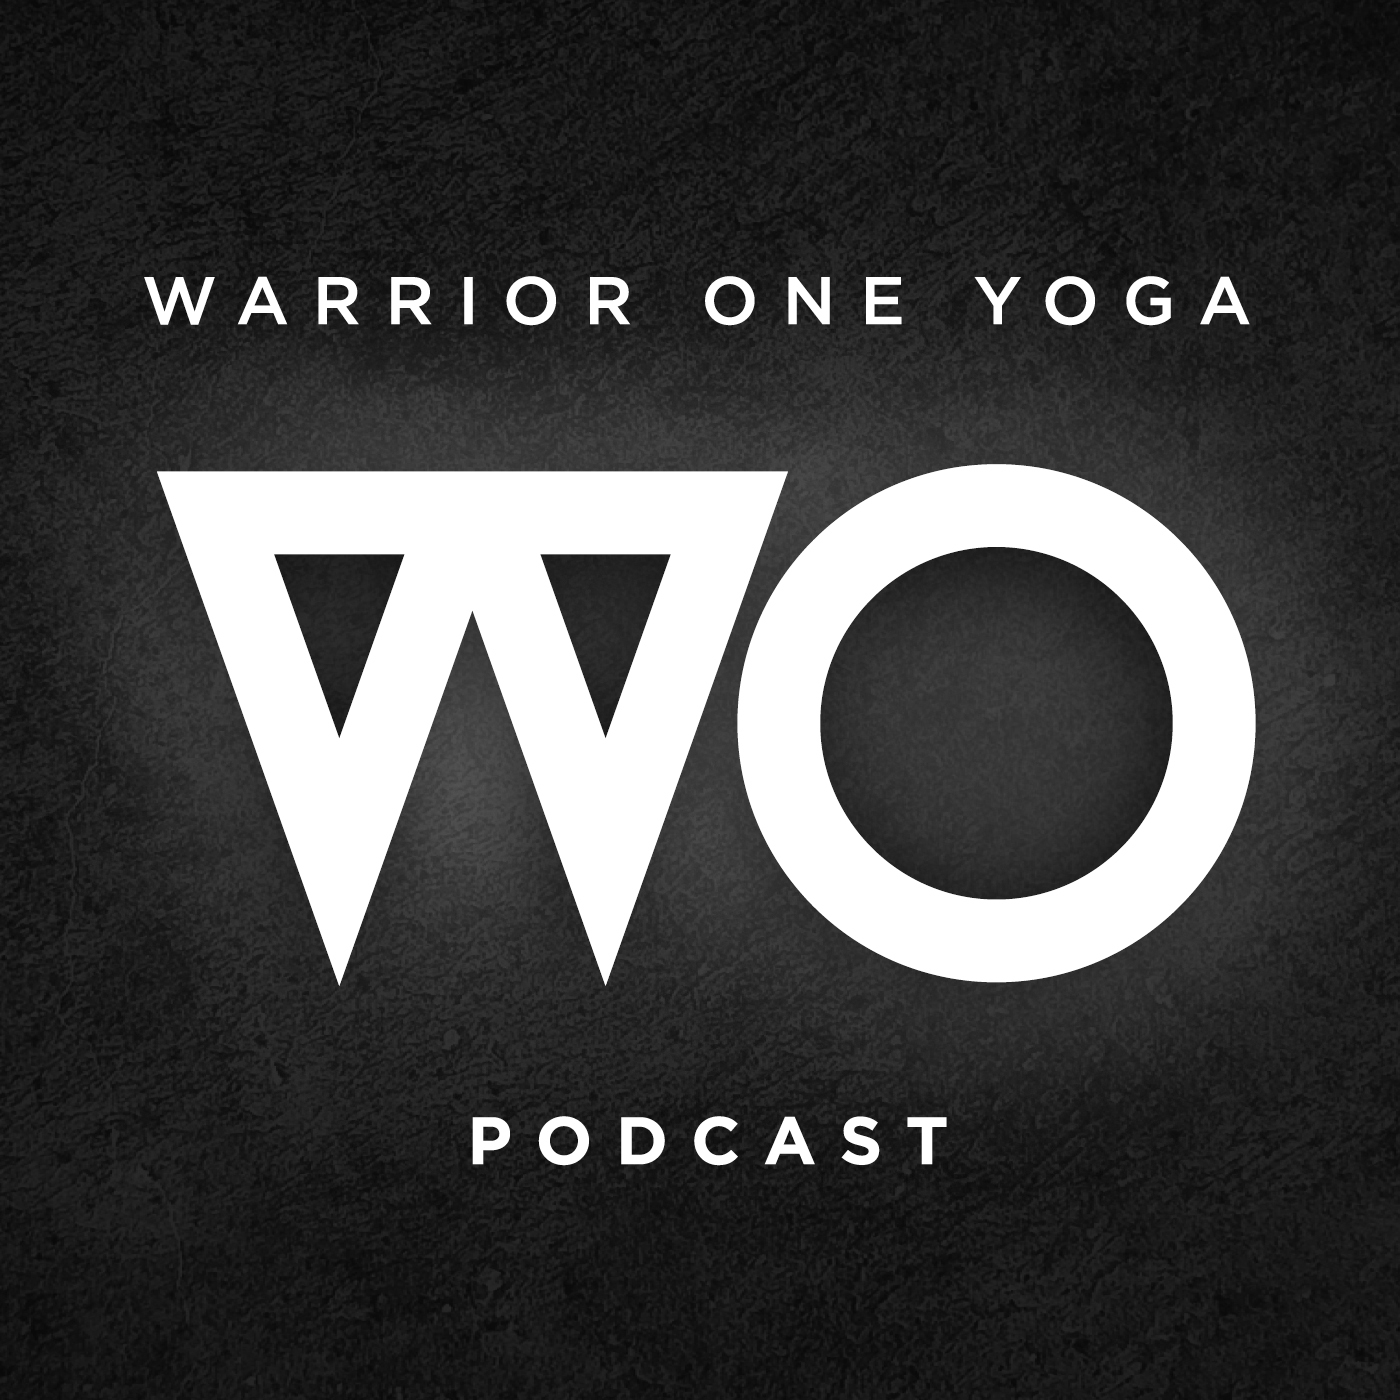 What you can expect from the Warrior One Yoga Podcast